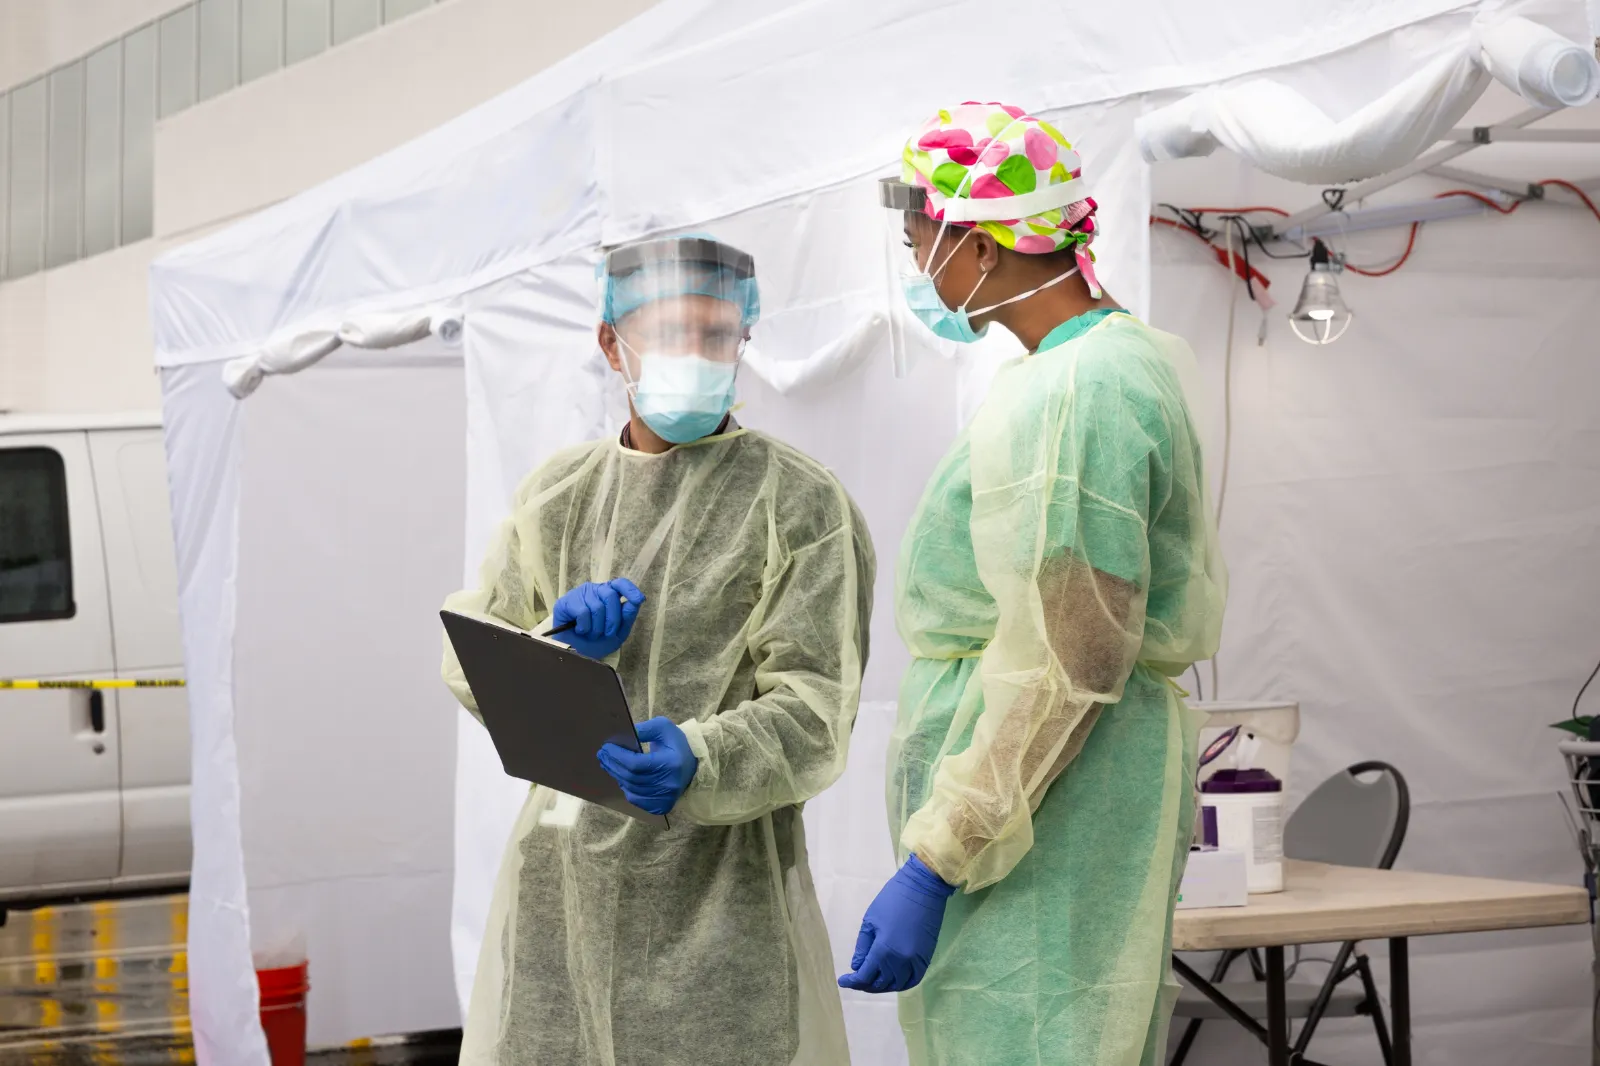 Two heathcare workers in full PPE discussing information on a clipboard, outside a tent